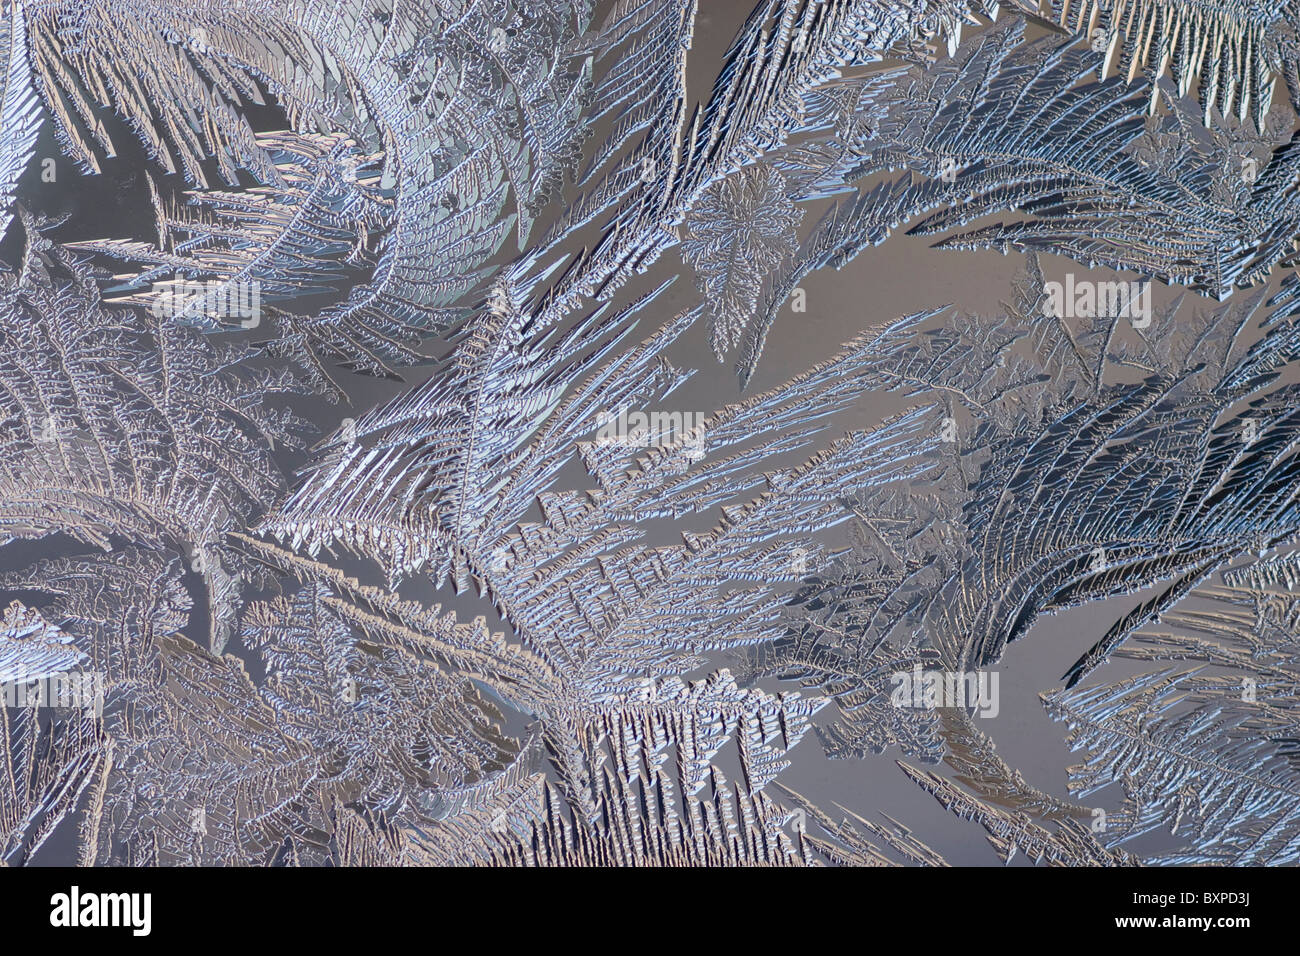 Frost formations on a window in winter. Stock Photo